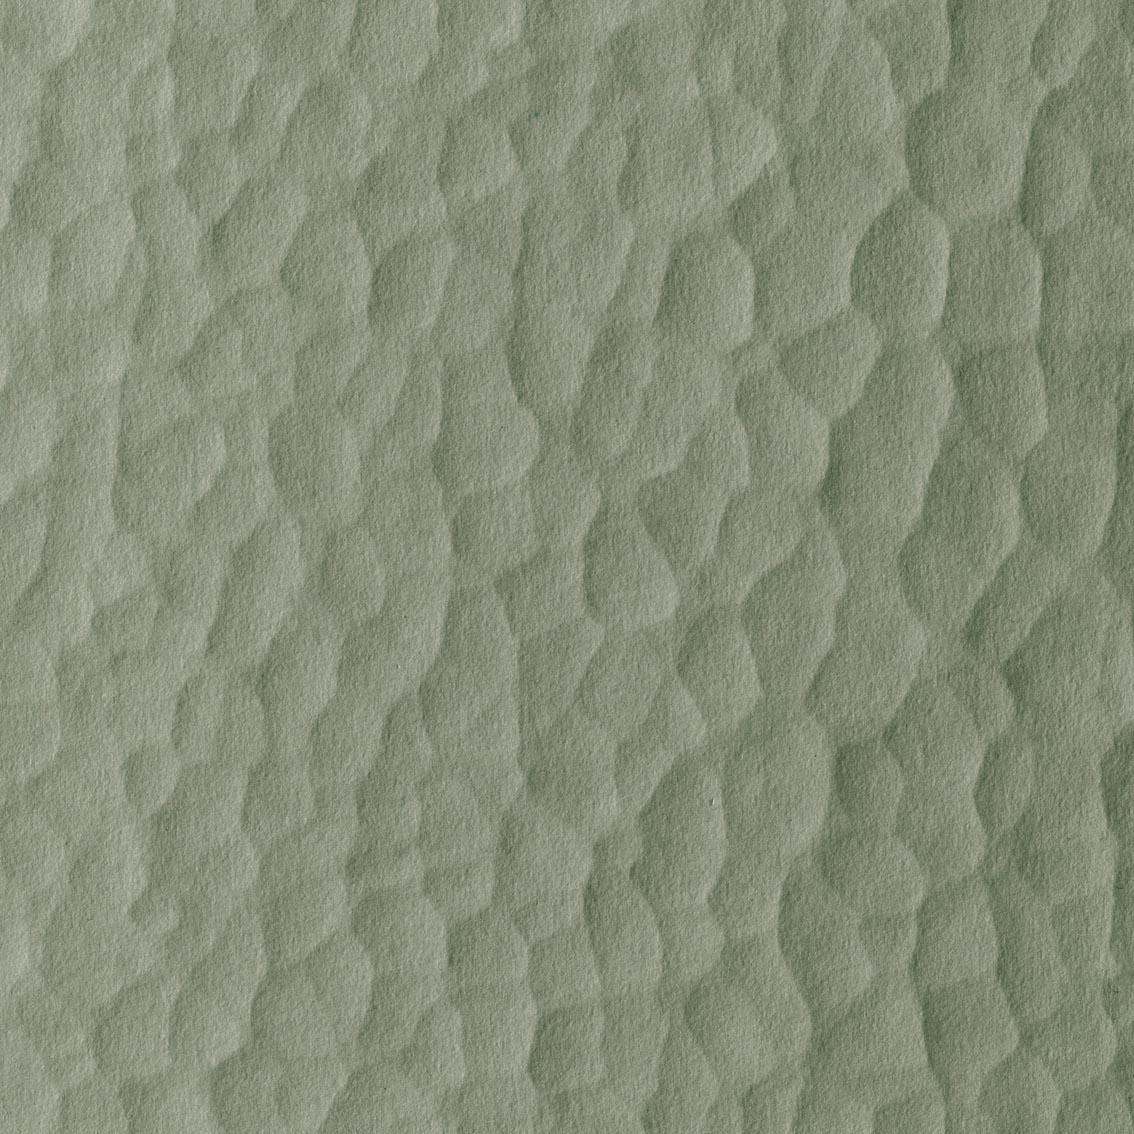 Hammered Pale green 018-zoom